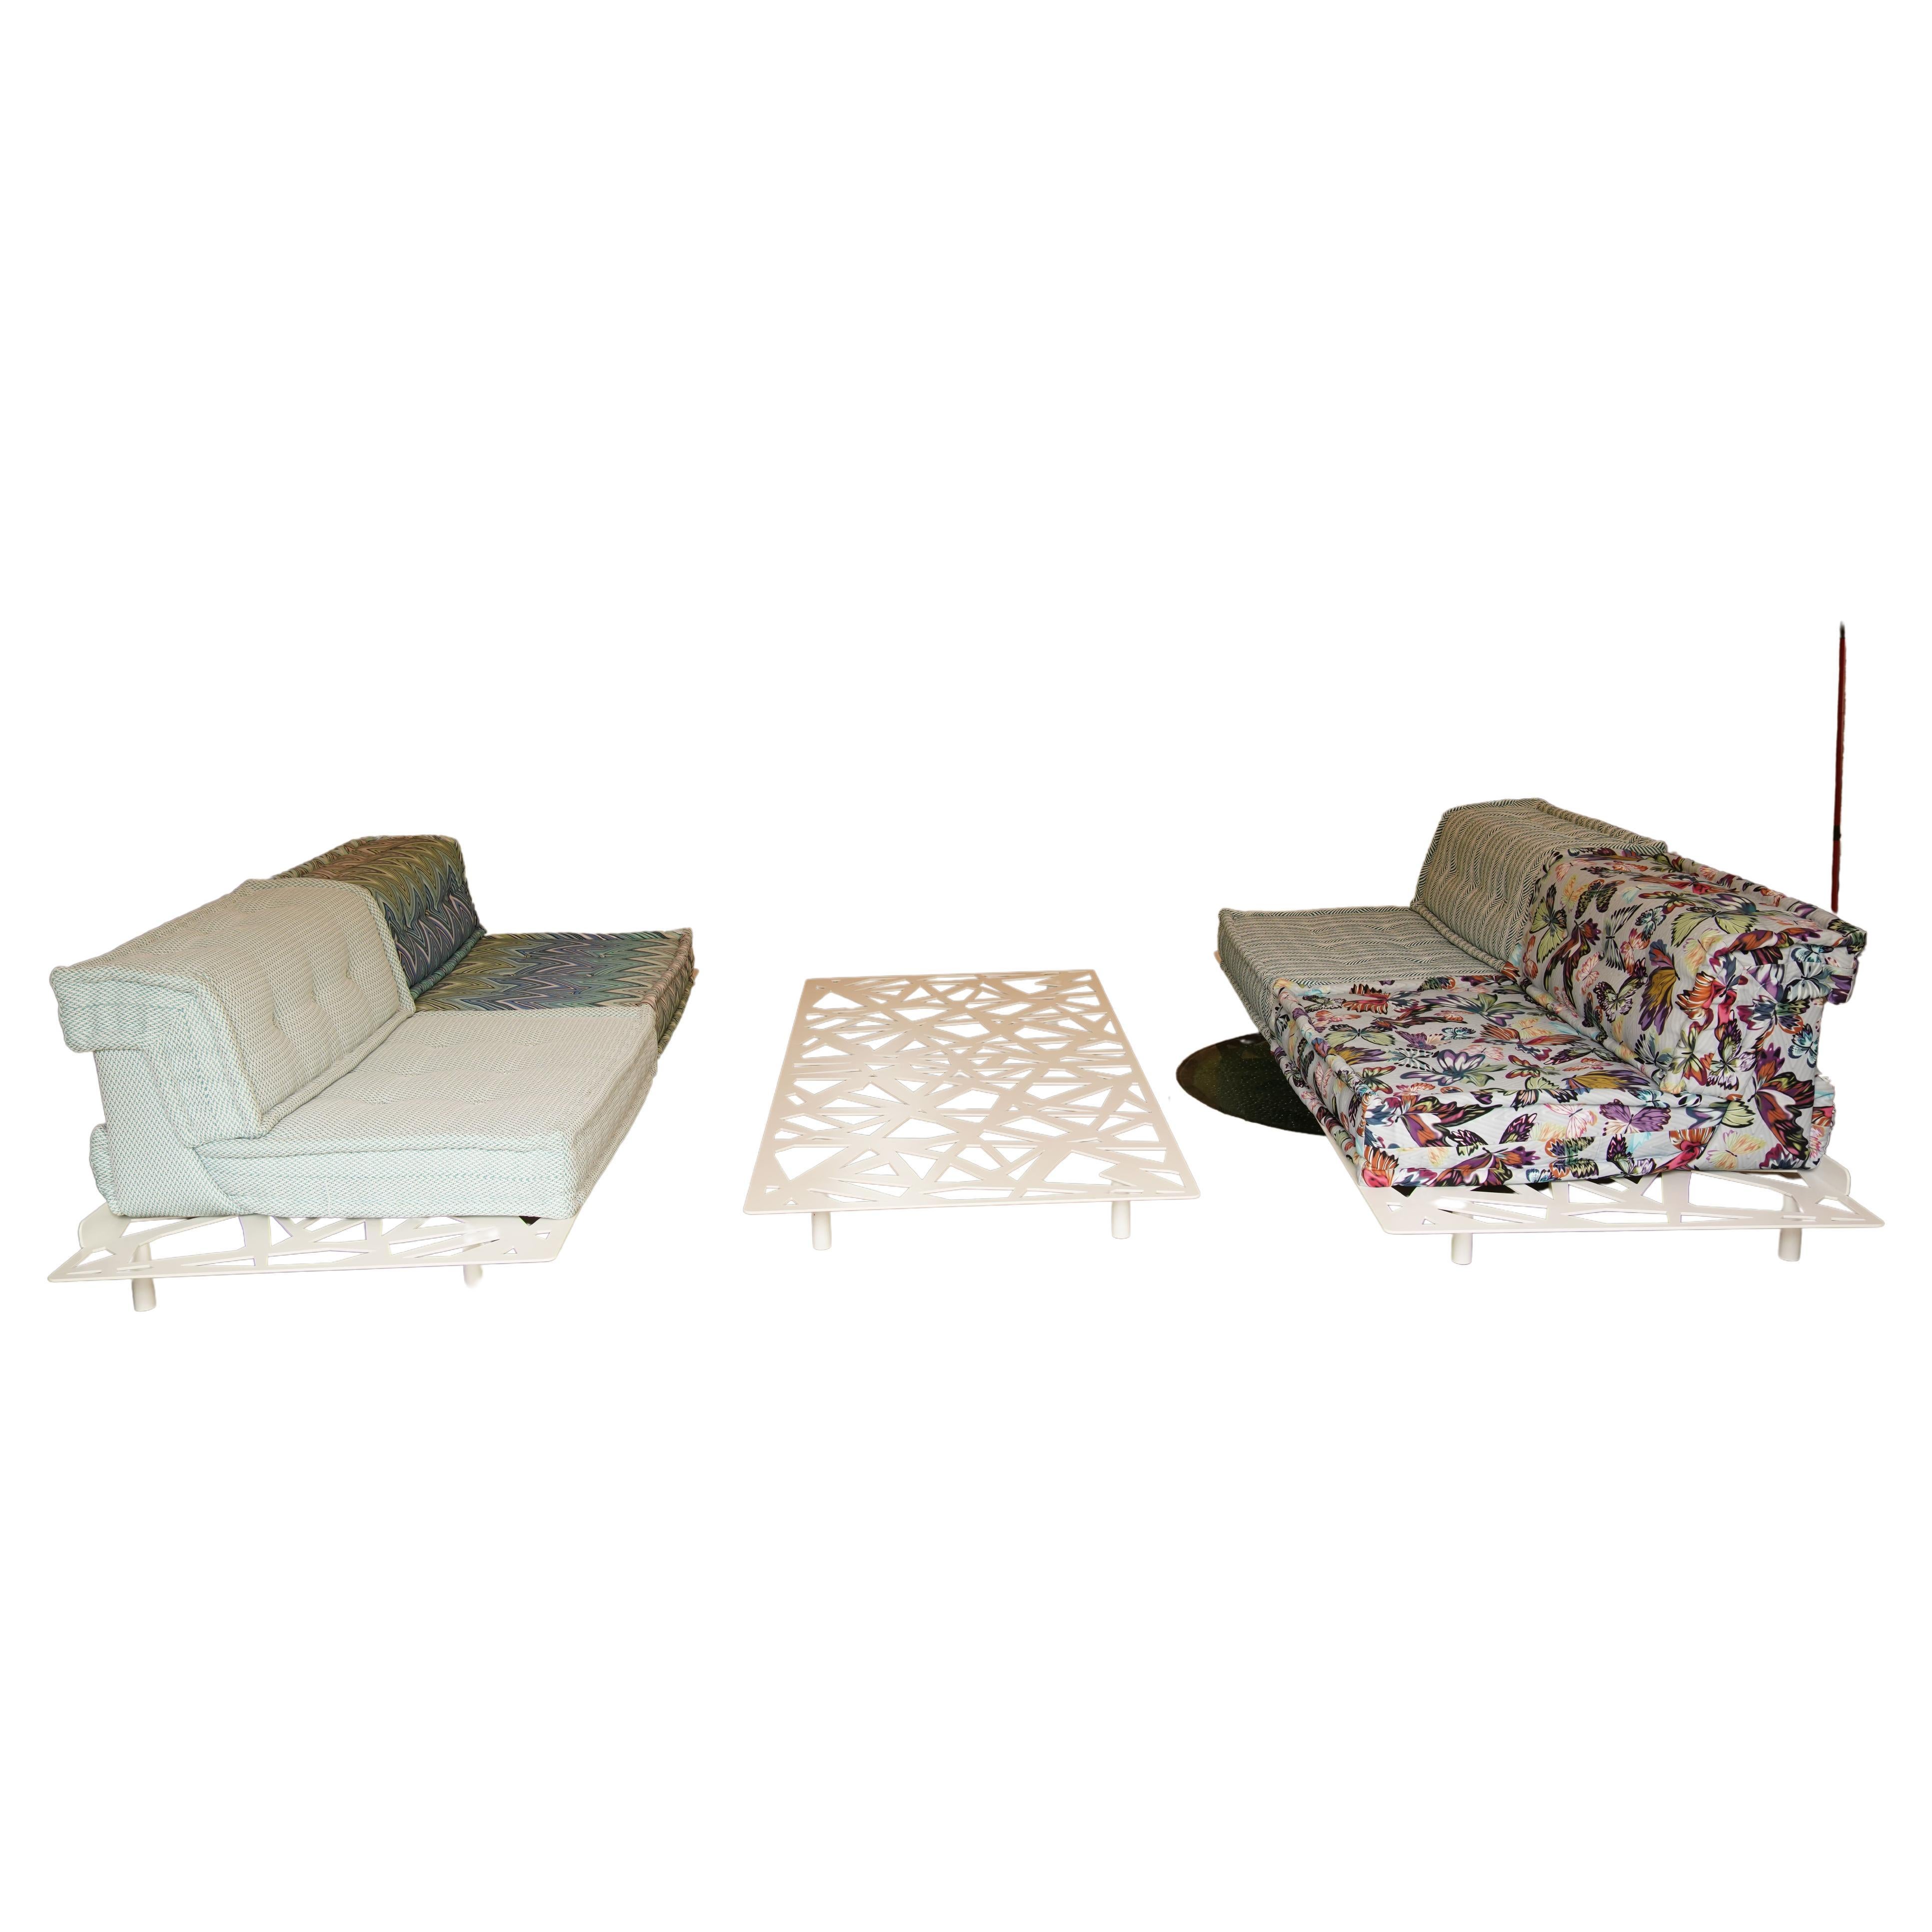 Mah Jong Outdoor Sofa with Table In Missoni Fabric by Roche Bobois, France 2020